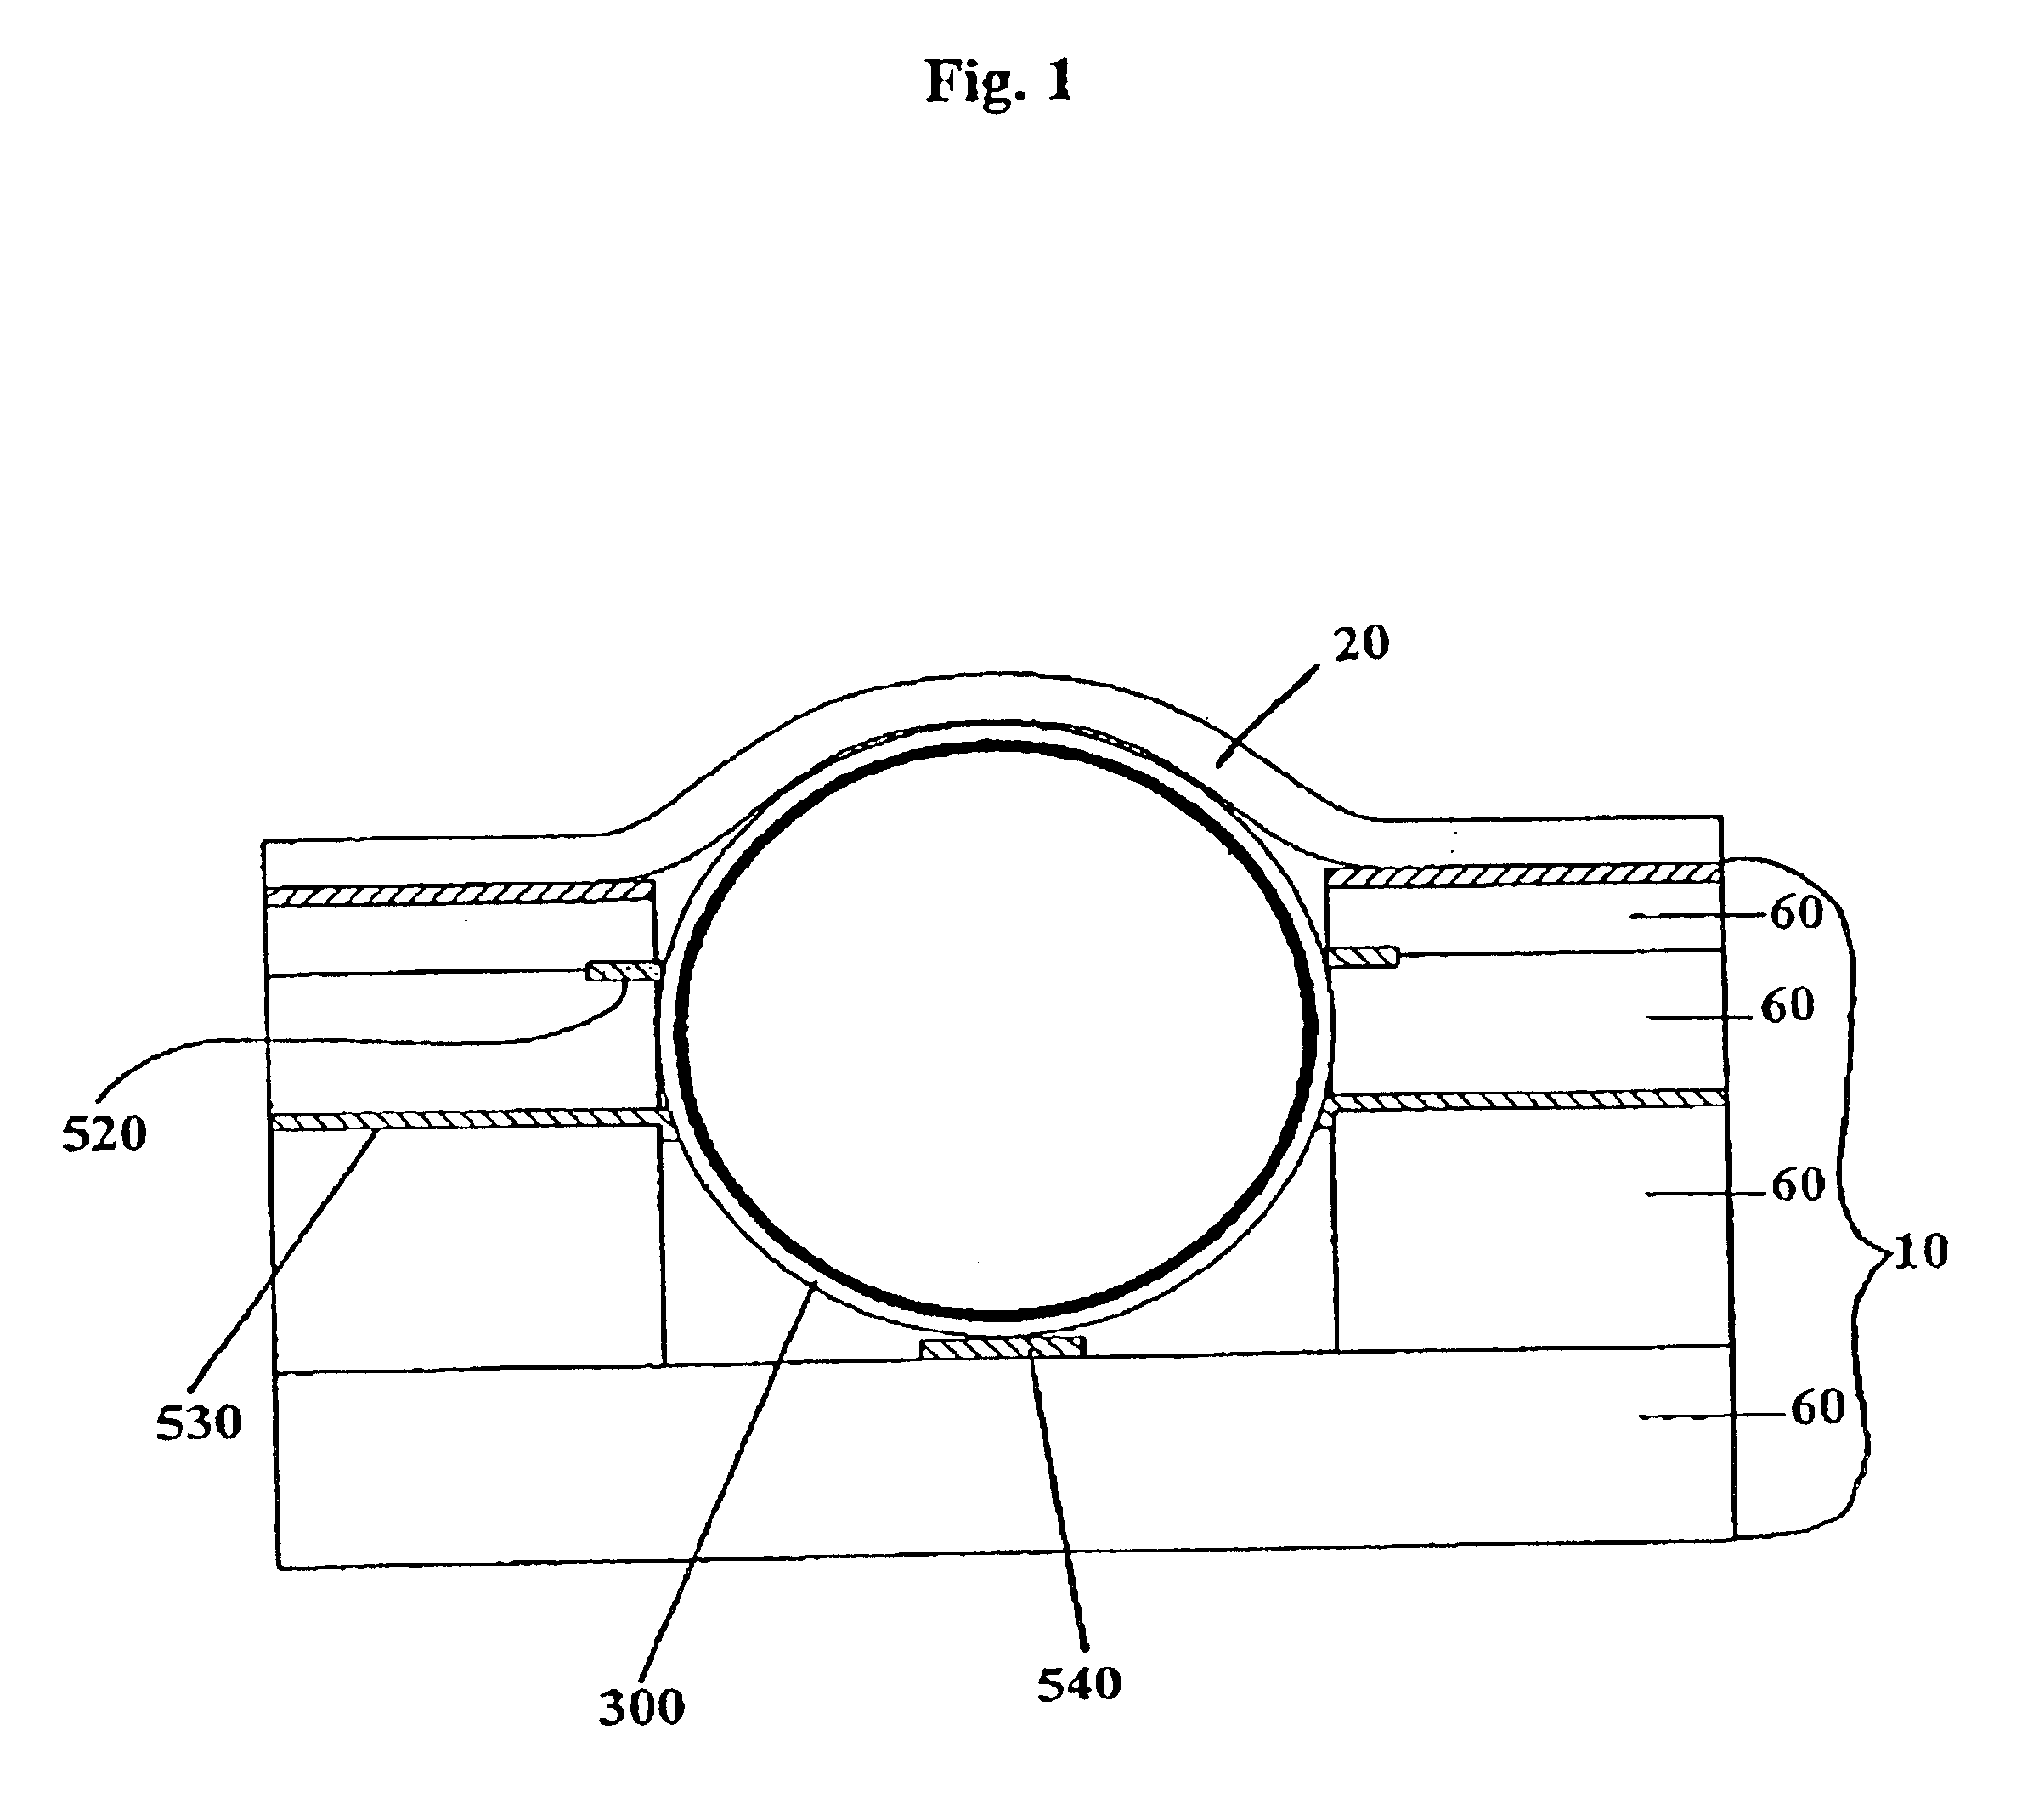 Design, fabrication, testing, and conditioning of micro-components for use in a light-emitting panel